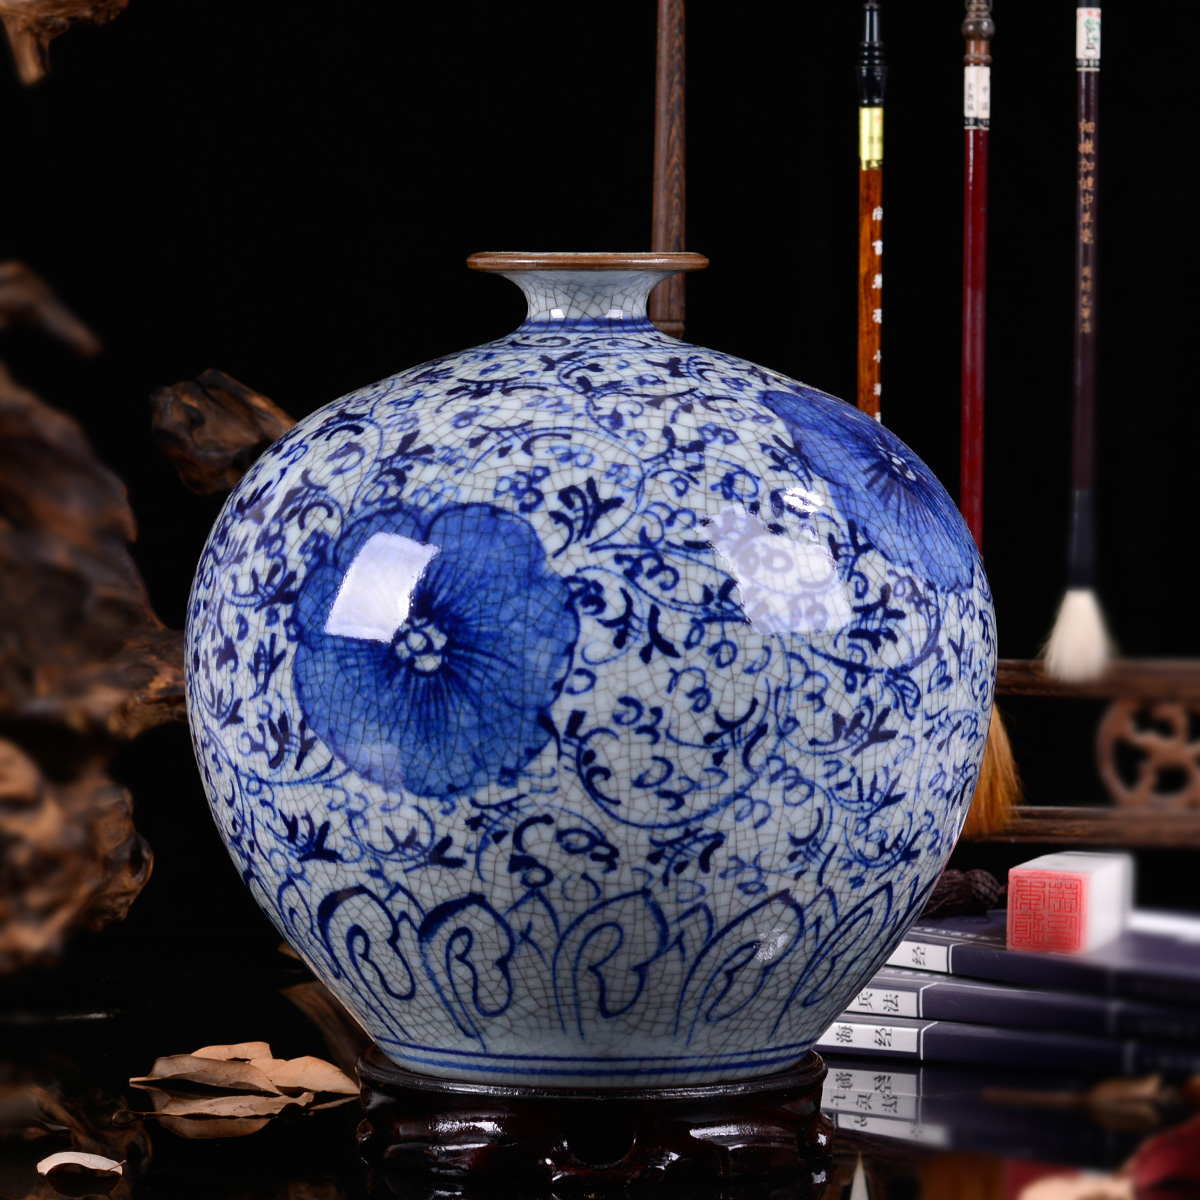 [$39.68] Ceramic vases, antique, hand-painted blue and white porcelain